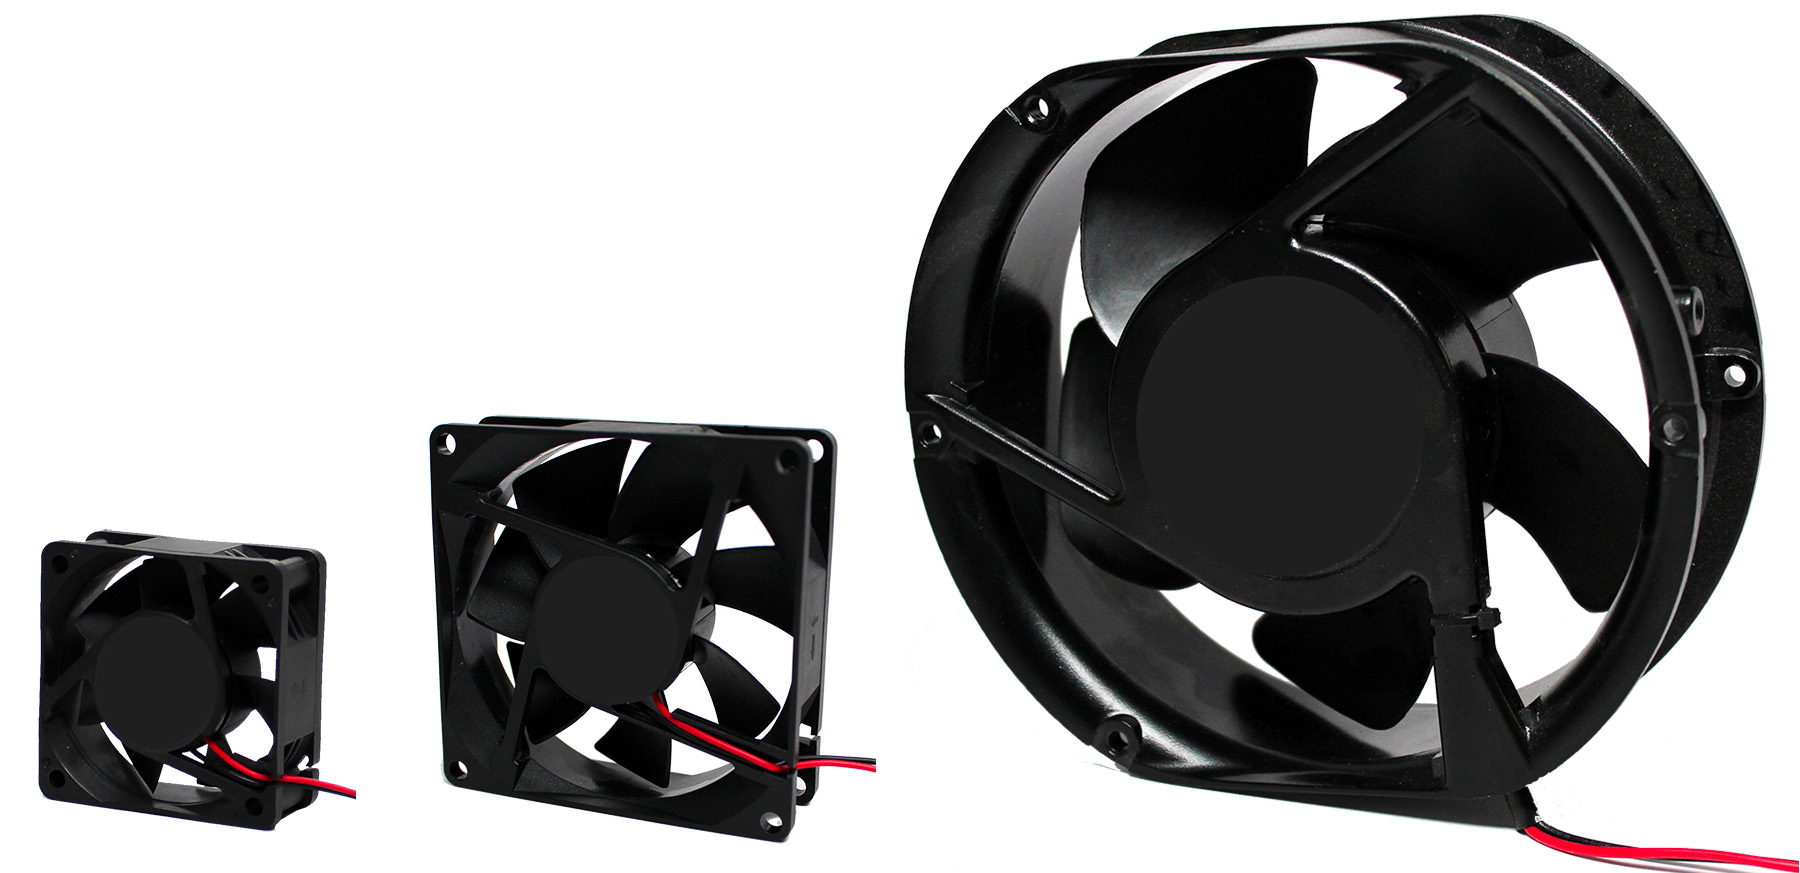 IP68-rated DC Fans For Harsh Environments